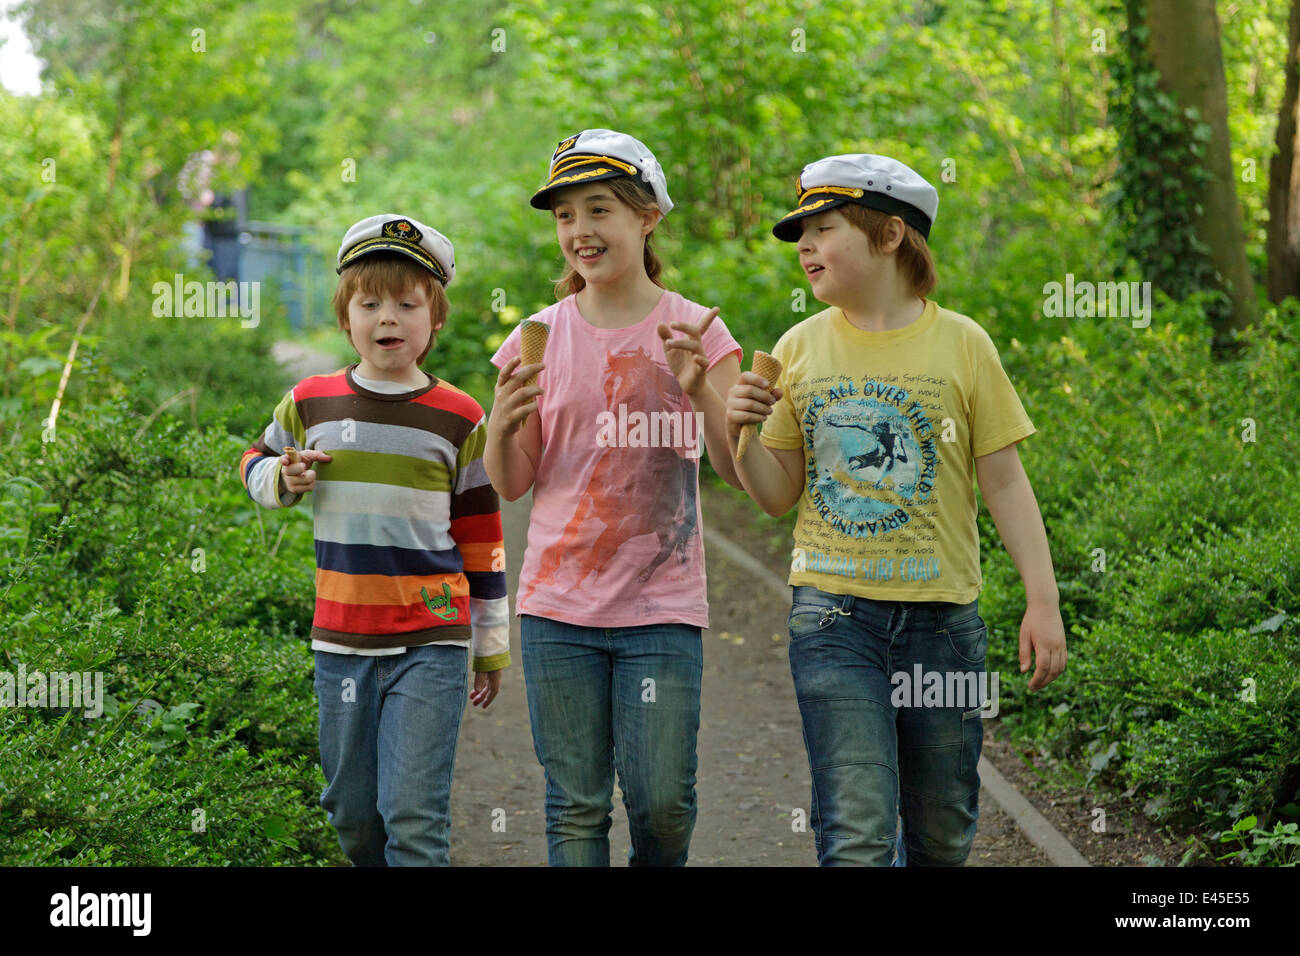 three children with captain´s hats having a conversation Stock Photo